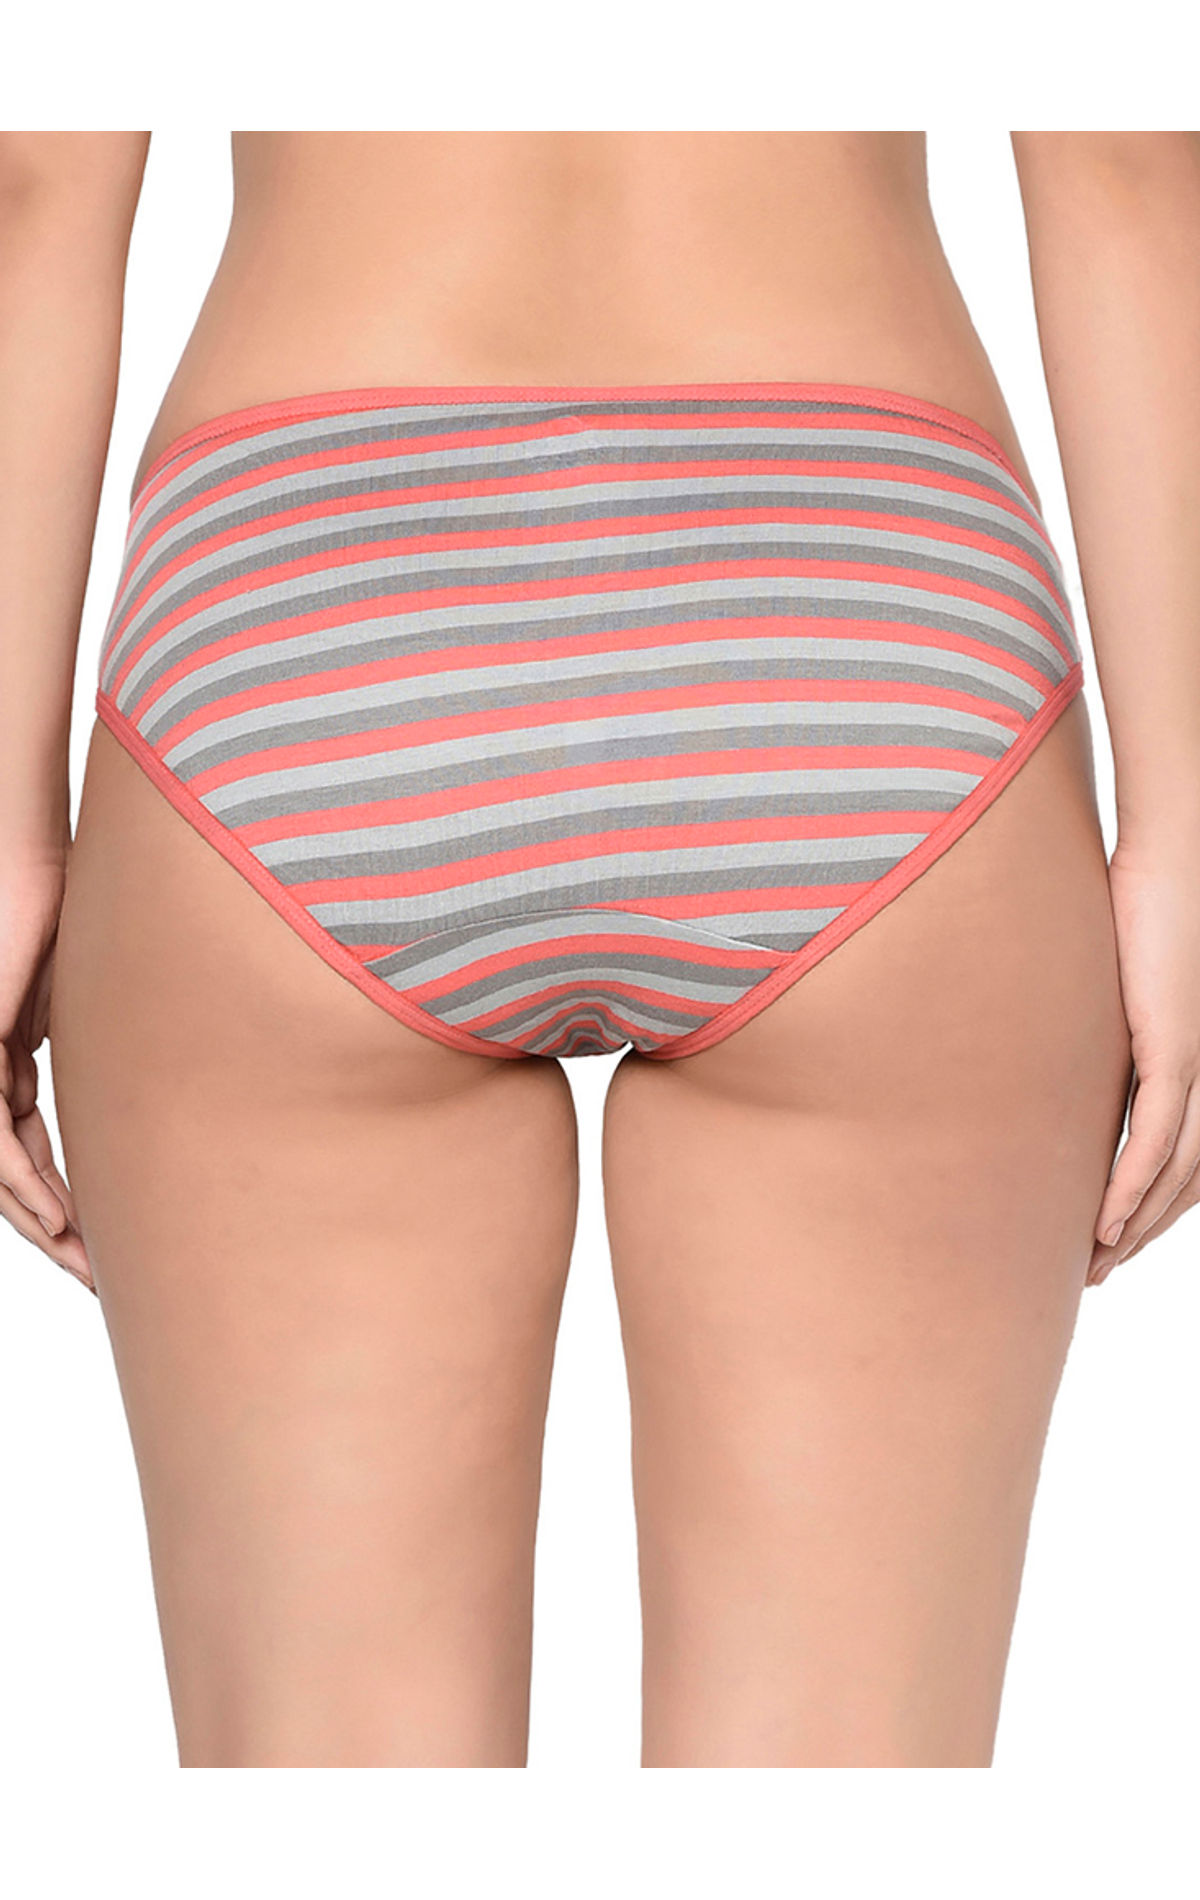 Striped Bodycare Ladies Cotton Brief Panty at Rs 495/piece in New